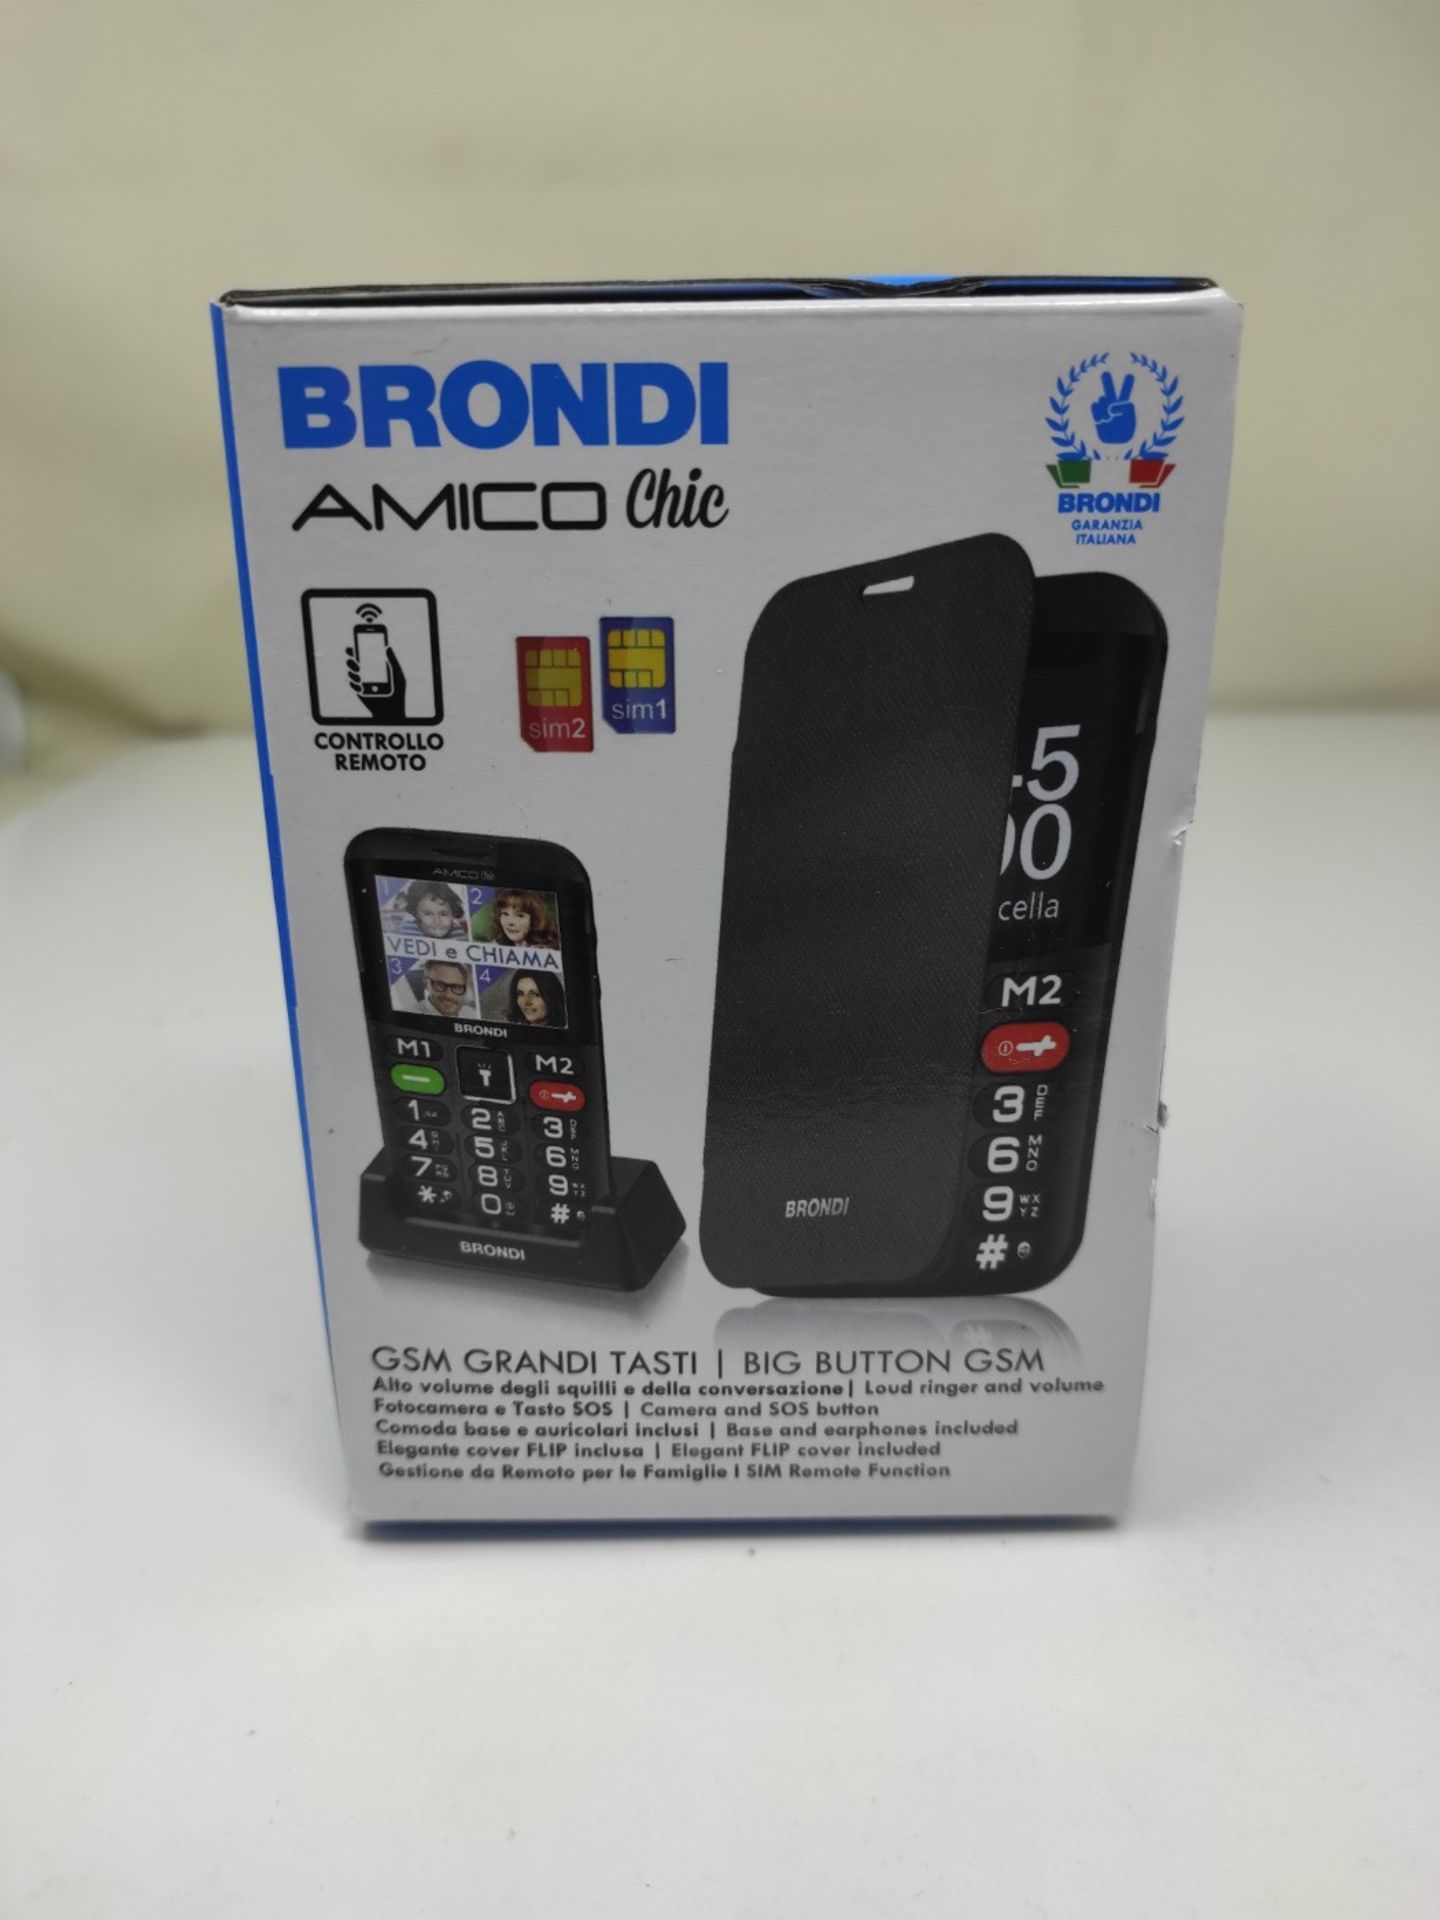 Cellular Brondi Amico Chic with case incl. - Image 2 of 3